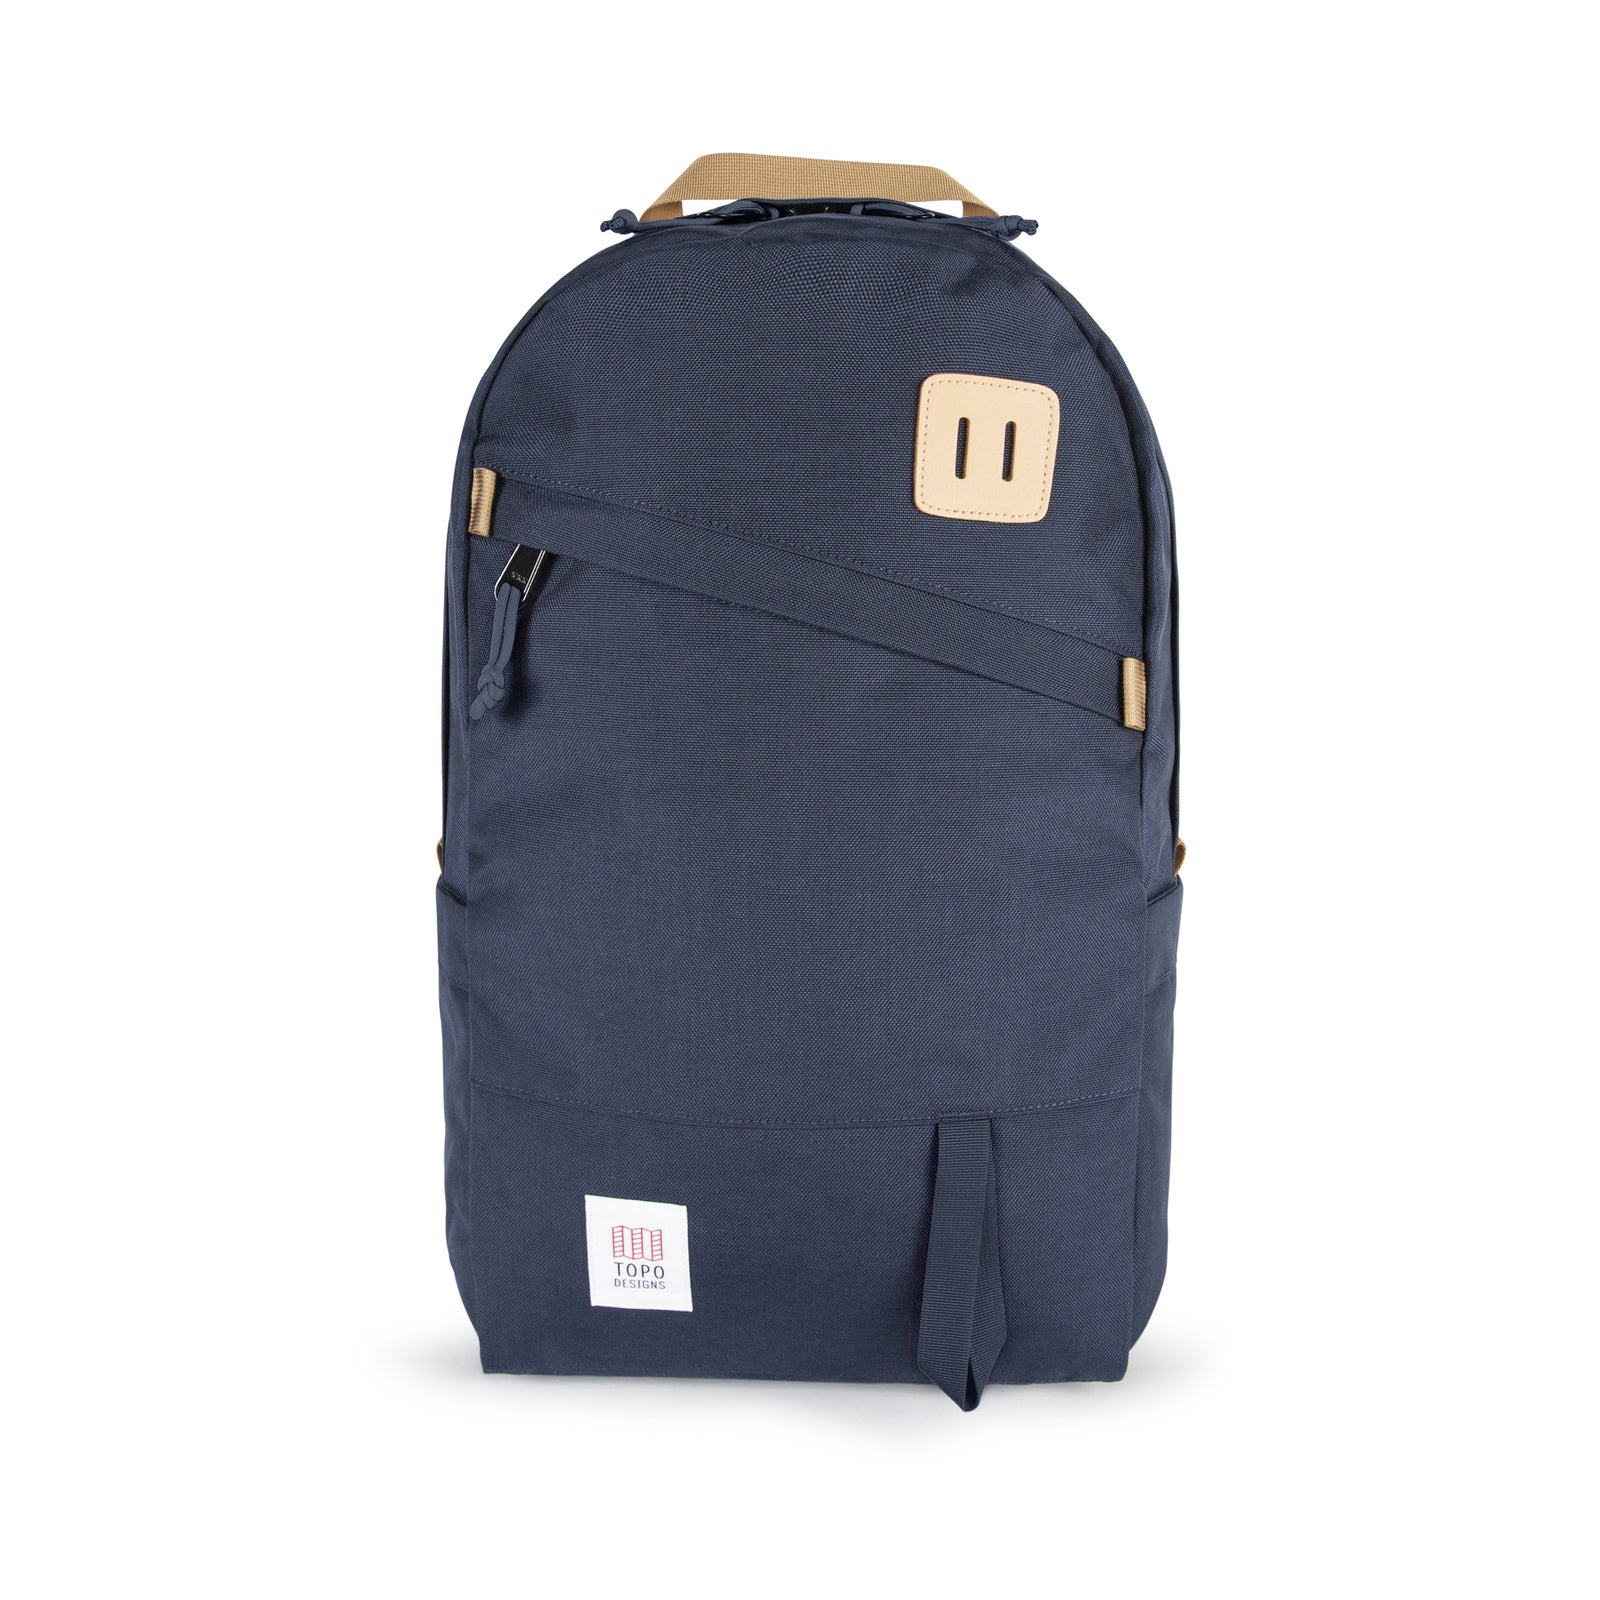 Topo Designs Daypack Classic 100% recycled nylon laptop backpack for work or school in "Navy"